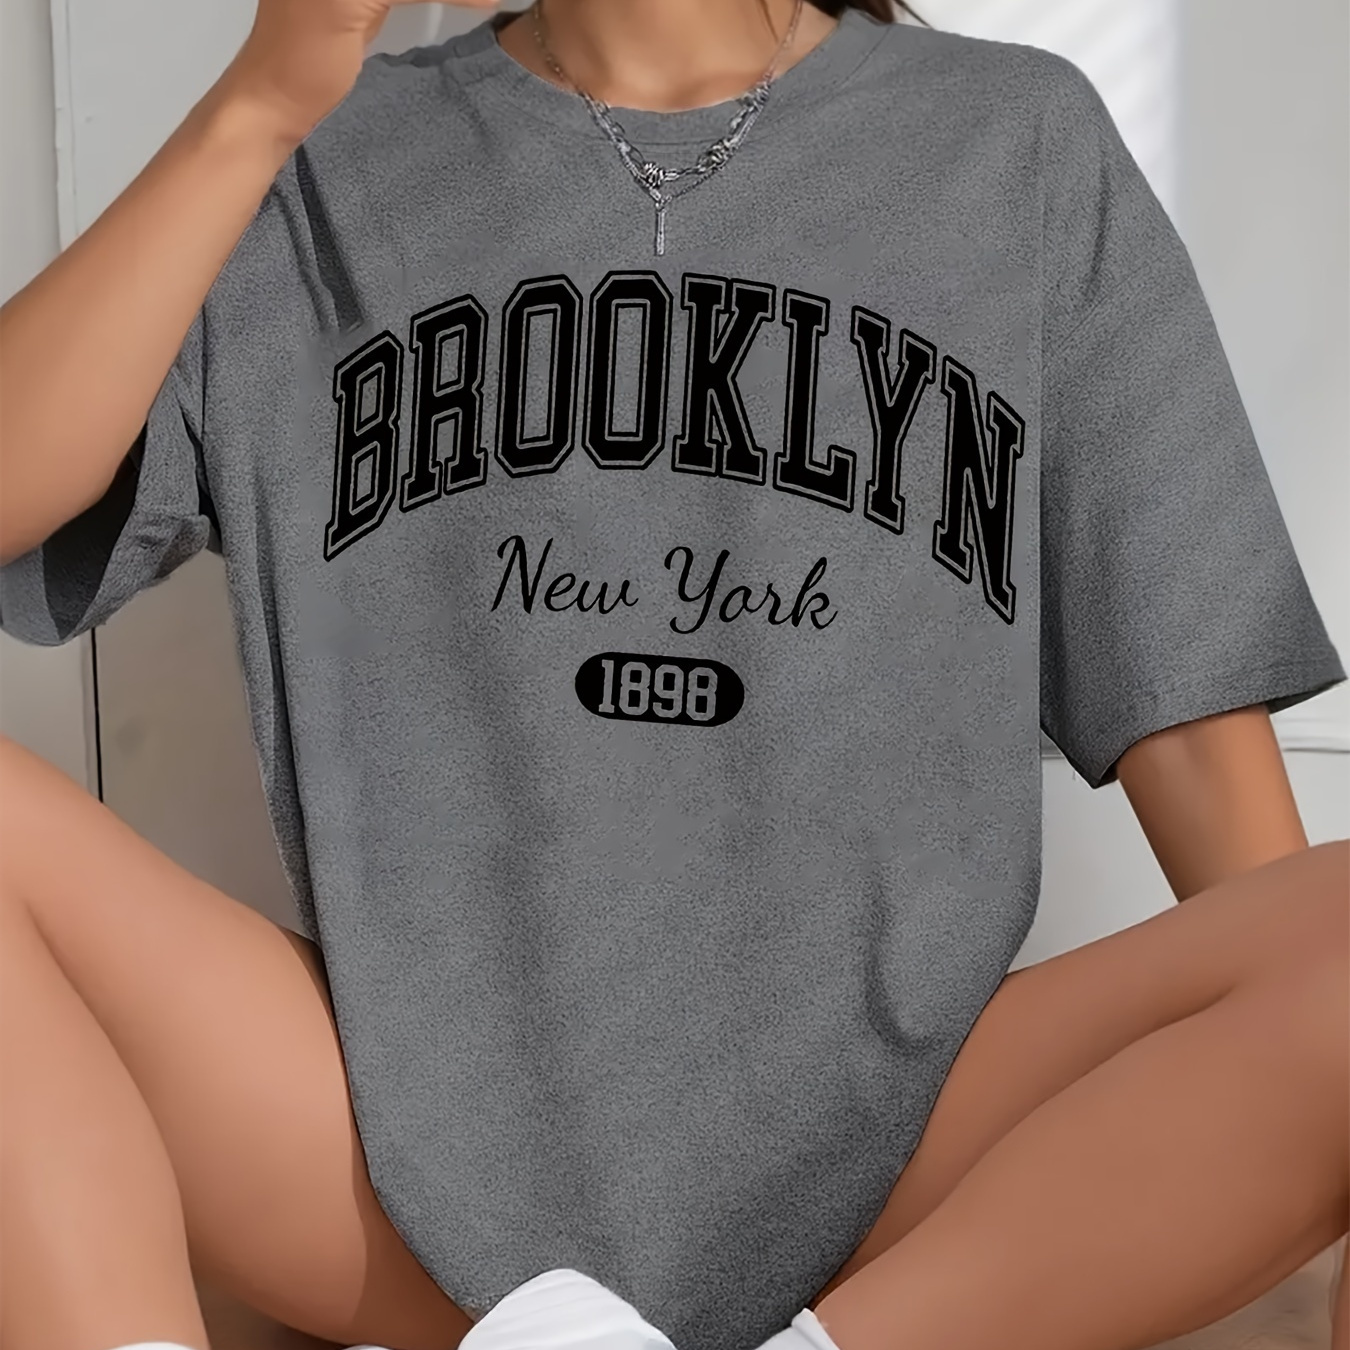 

Plus Size Brooklyn Print T-shirt, Casual Short Sleeve Crew Neck Top For Spring & Summer, Women's Plus Size Clothing